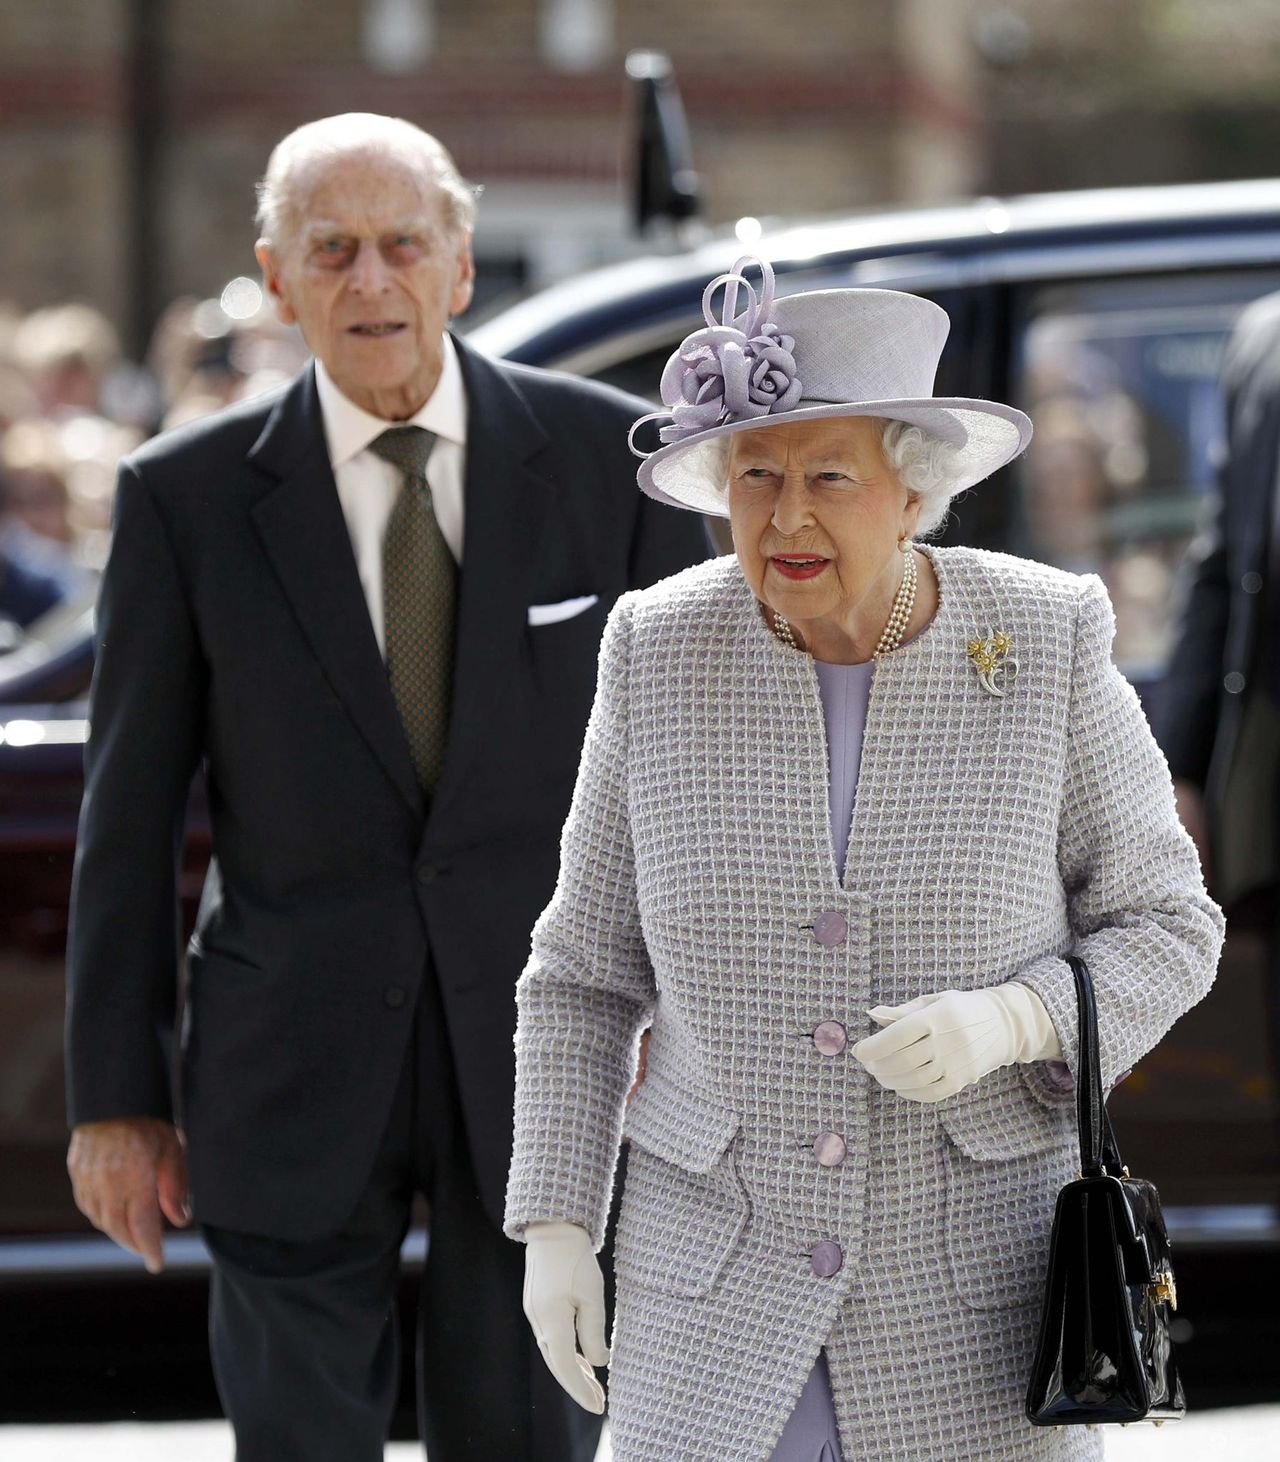 Britain's Queen Elizabeth and Prince Philip arrive at Priory View, an independent living scheme for older residents, in Dunstable, Britain April 11, 2017.